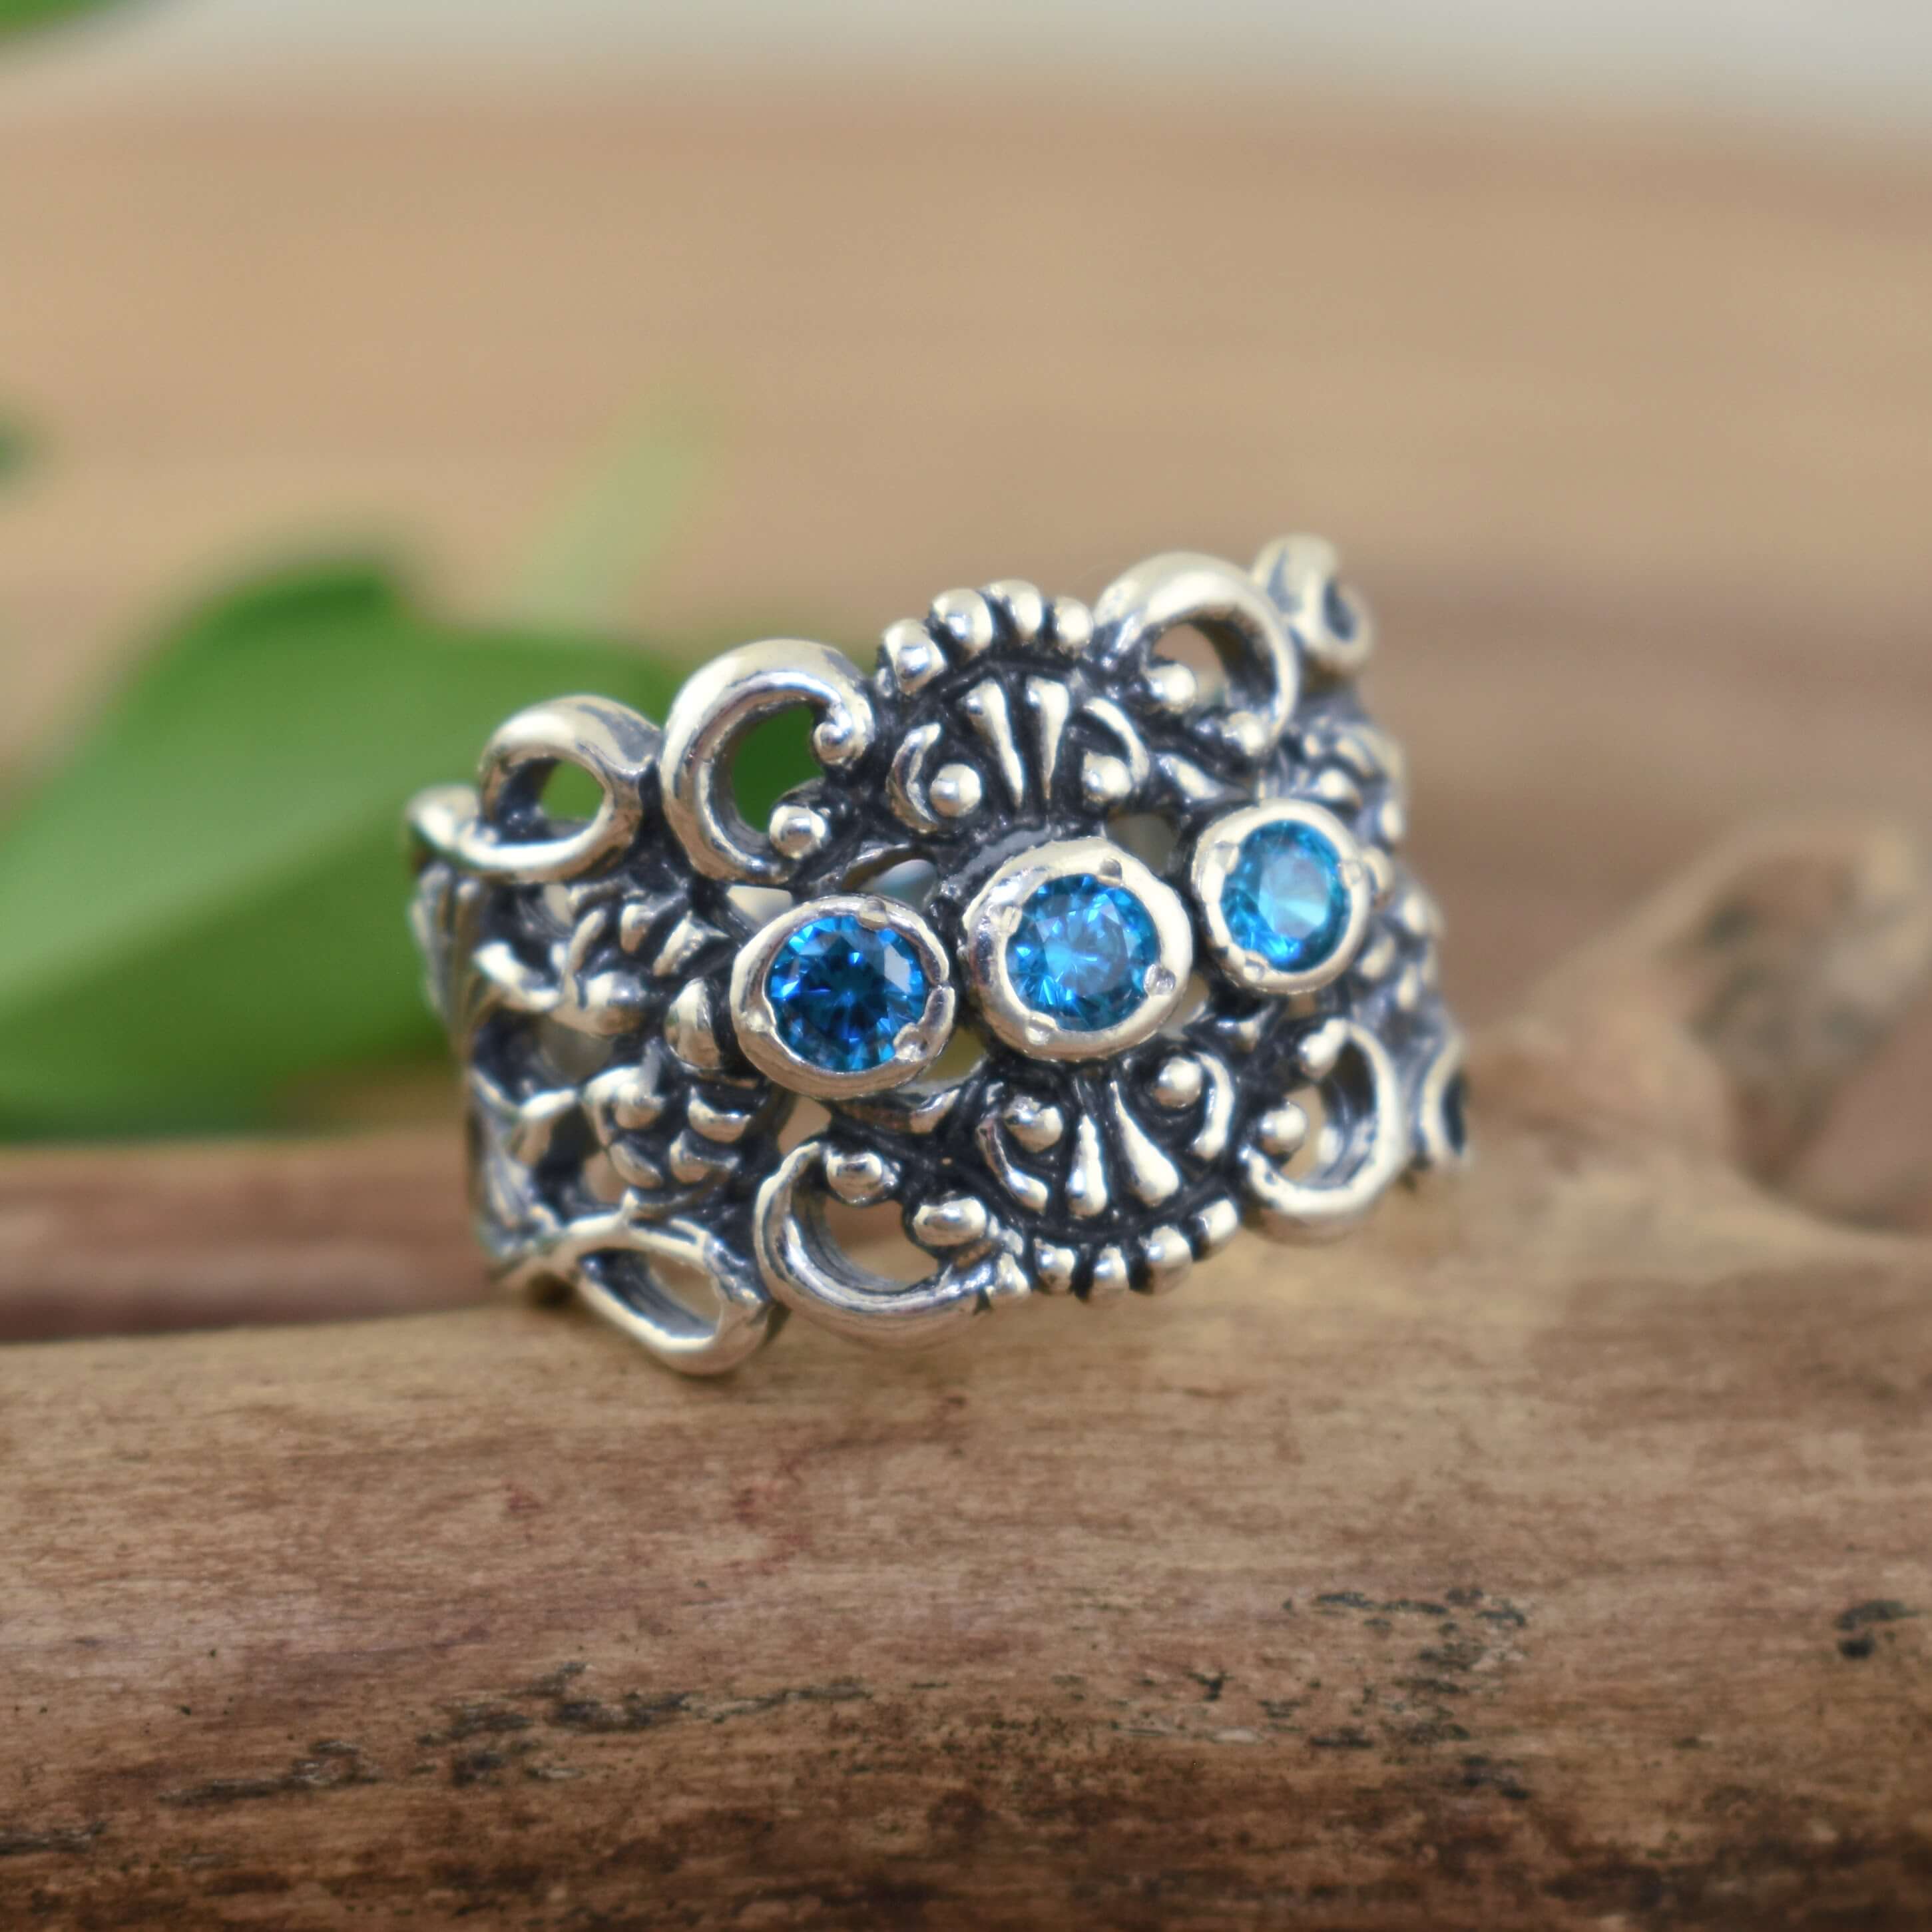 Blue stone ring set in antiqued sterling silver